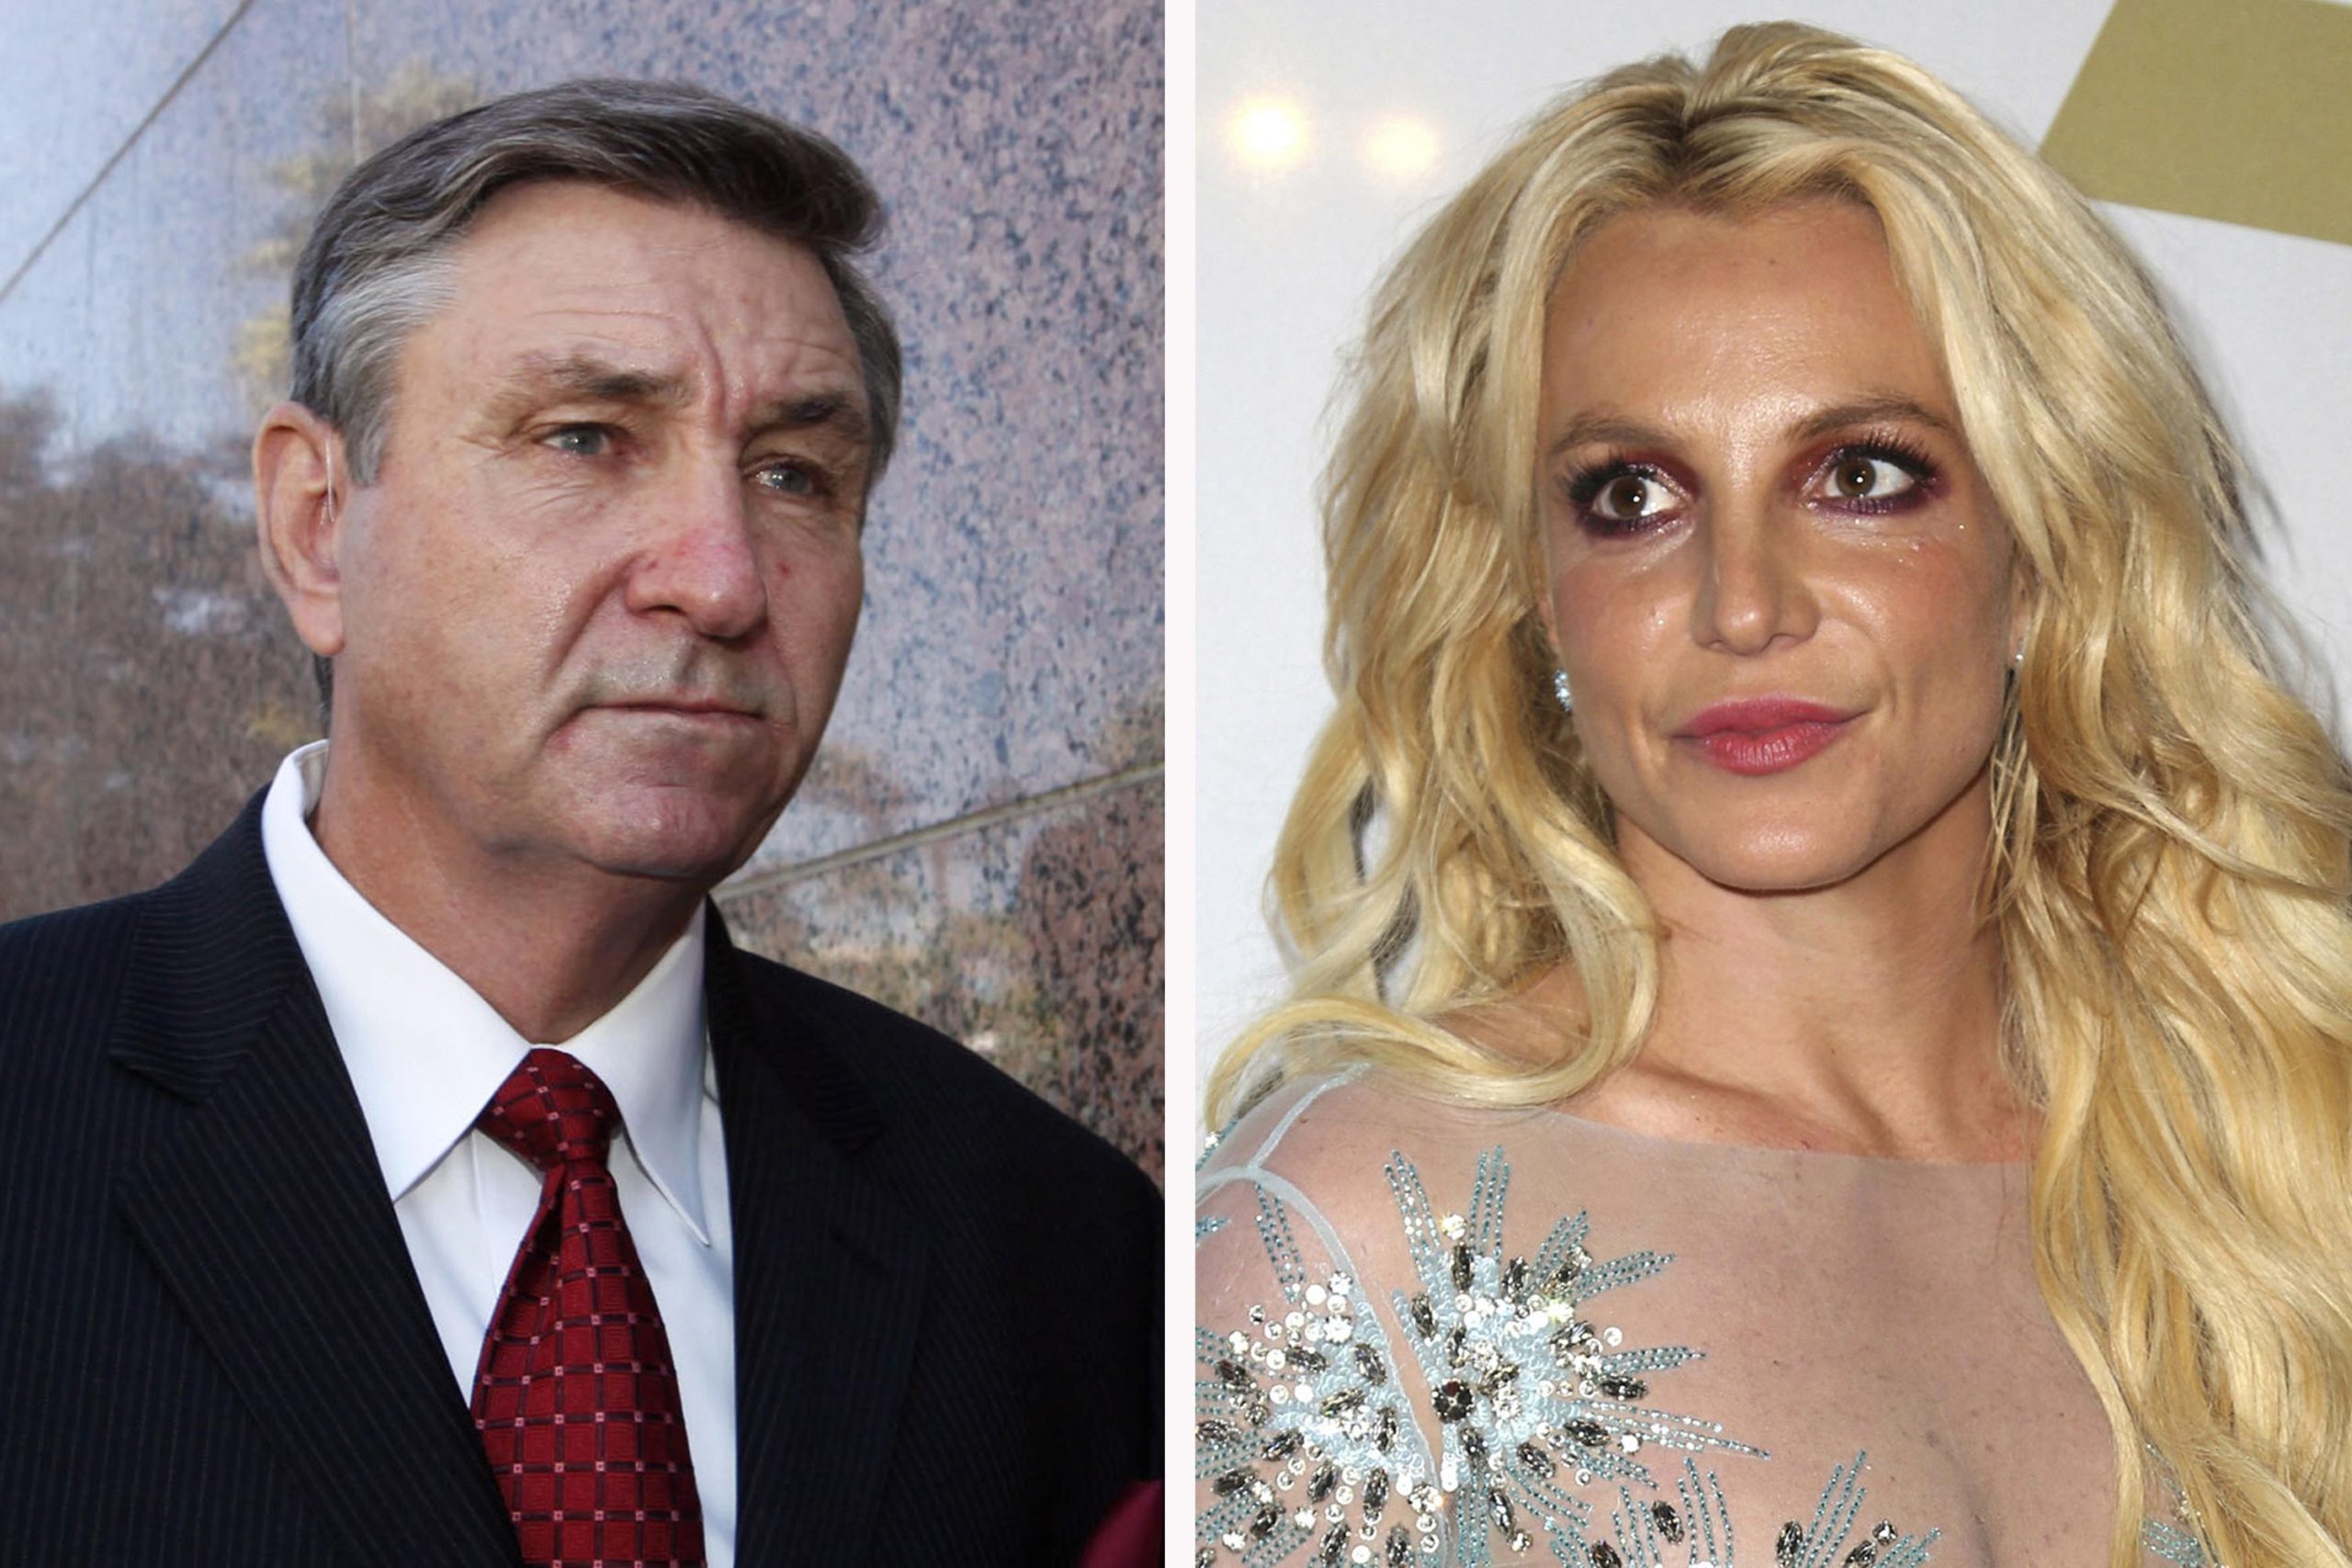 Britney Spears Has Lost A Court Appeal To Have Her Father Removed As Her Conservator